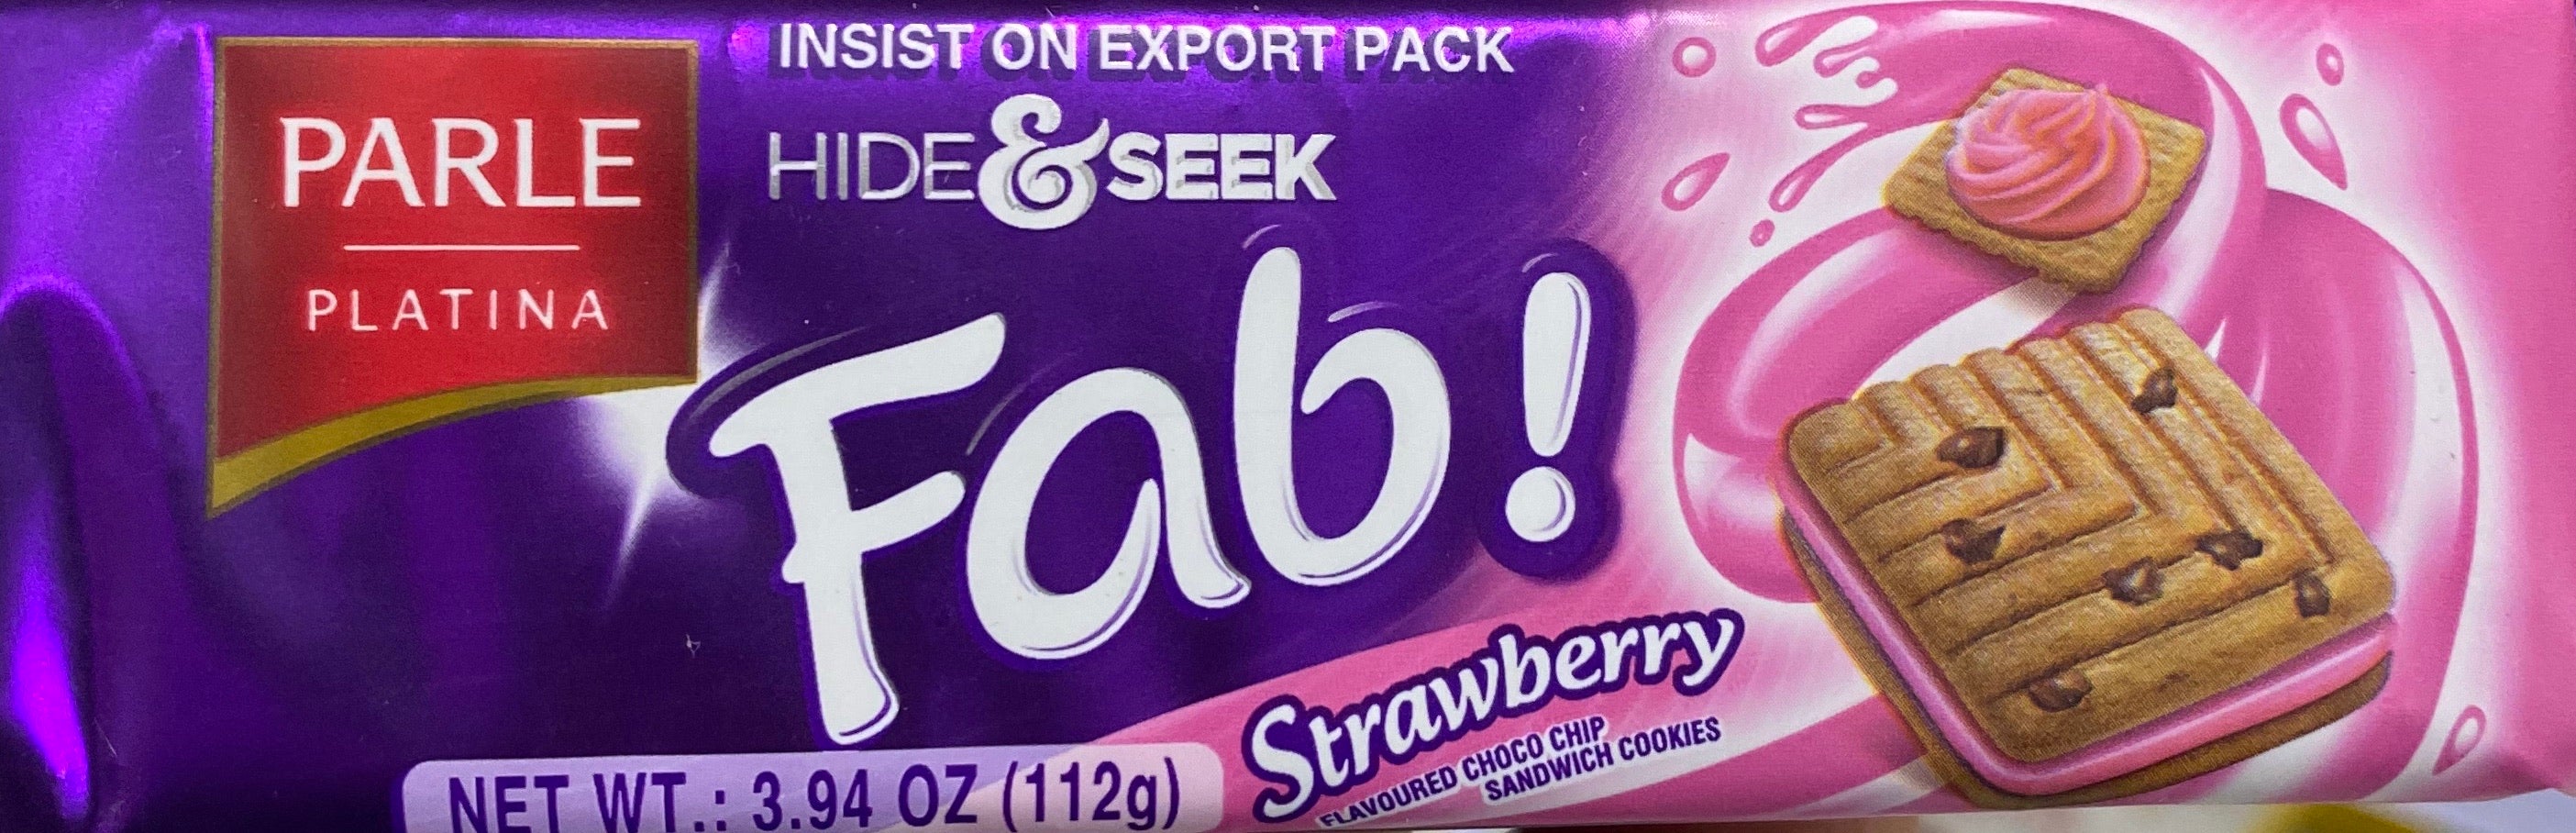 Parle Hide Seek Fab Strawberry Biscuits Fastindiangrocery Com